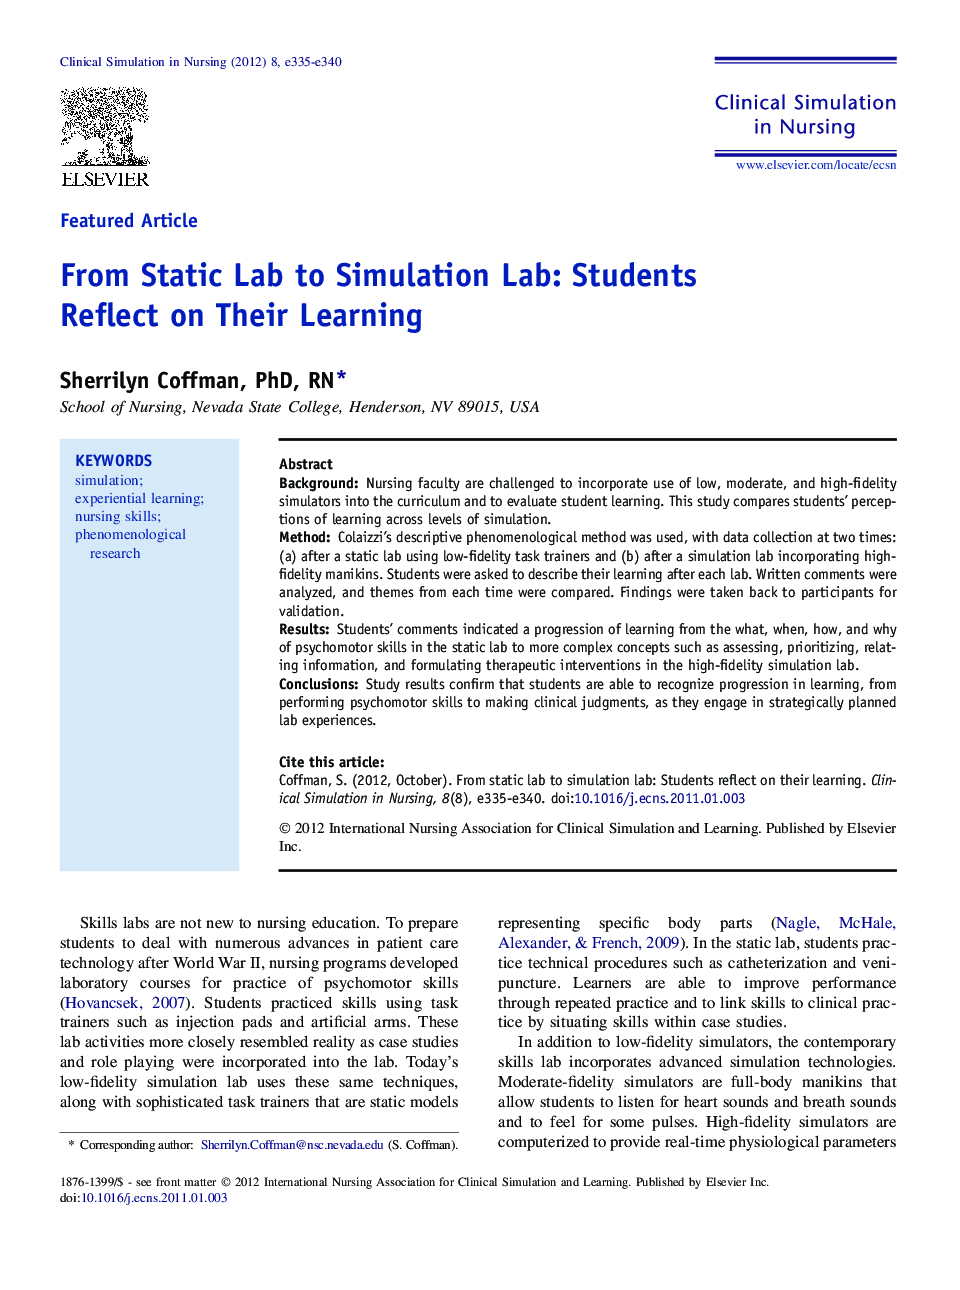 From Static Lab to Simulation Lab: Students Reflect on Their Learning